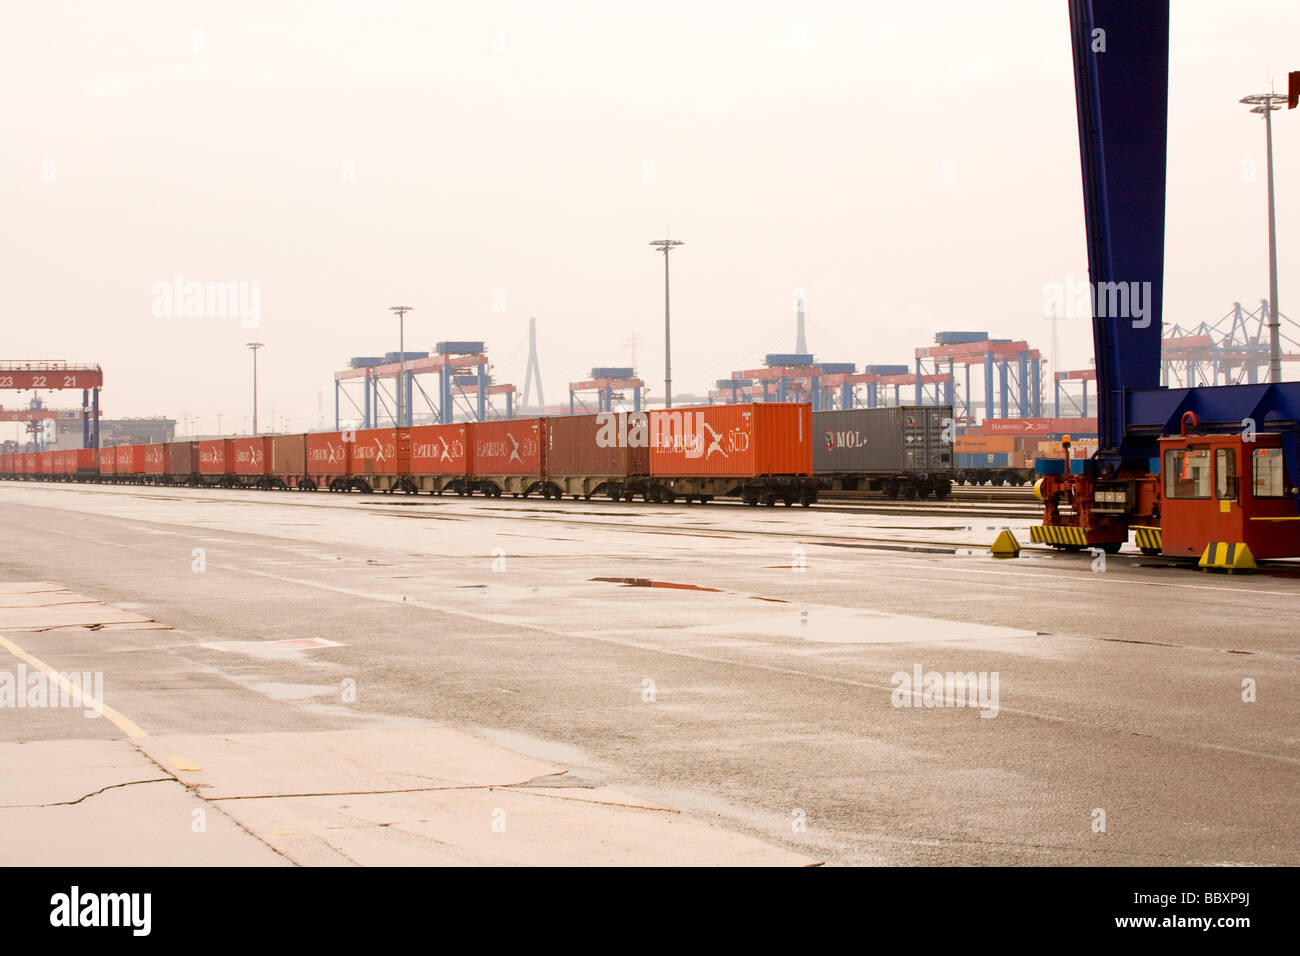 Intermodal ship-to-rail container freight on a port railway network waiting for transit. Stock Photo